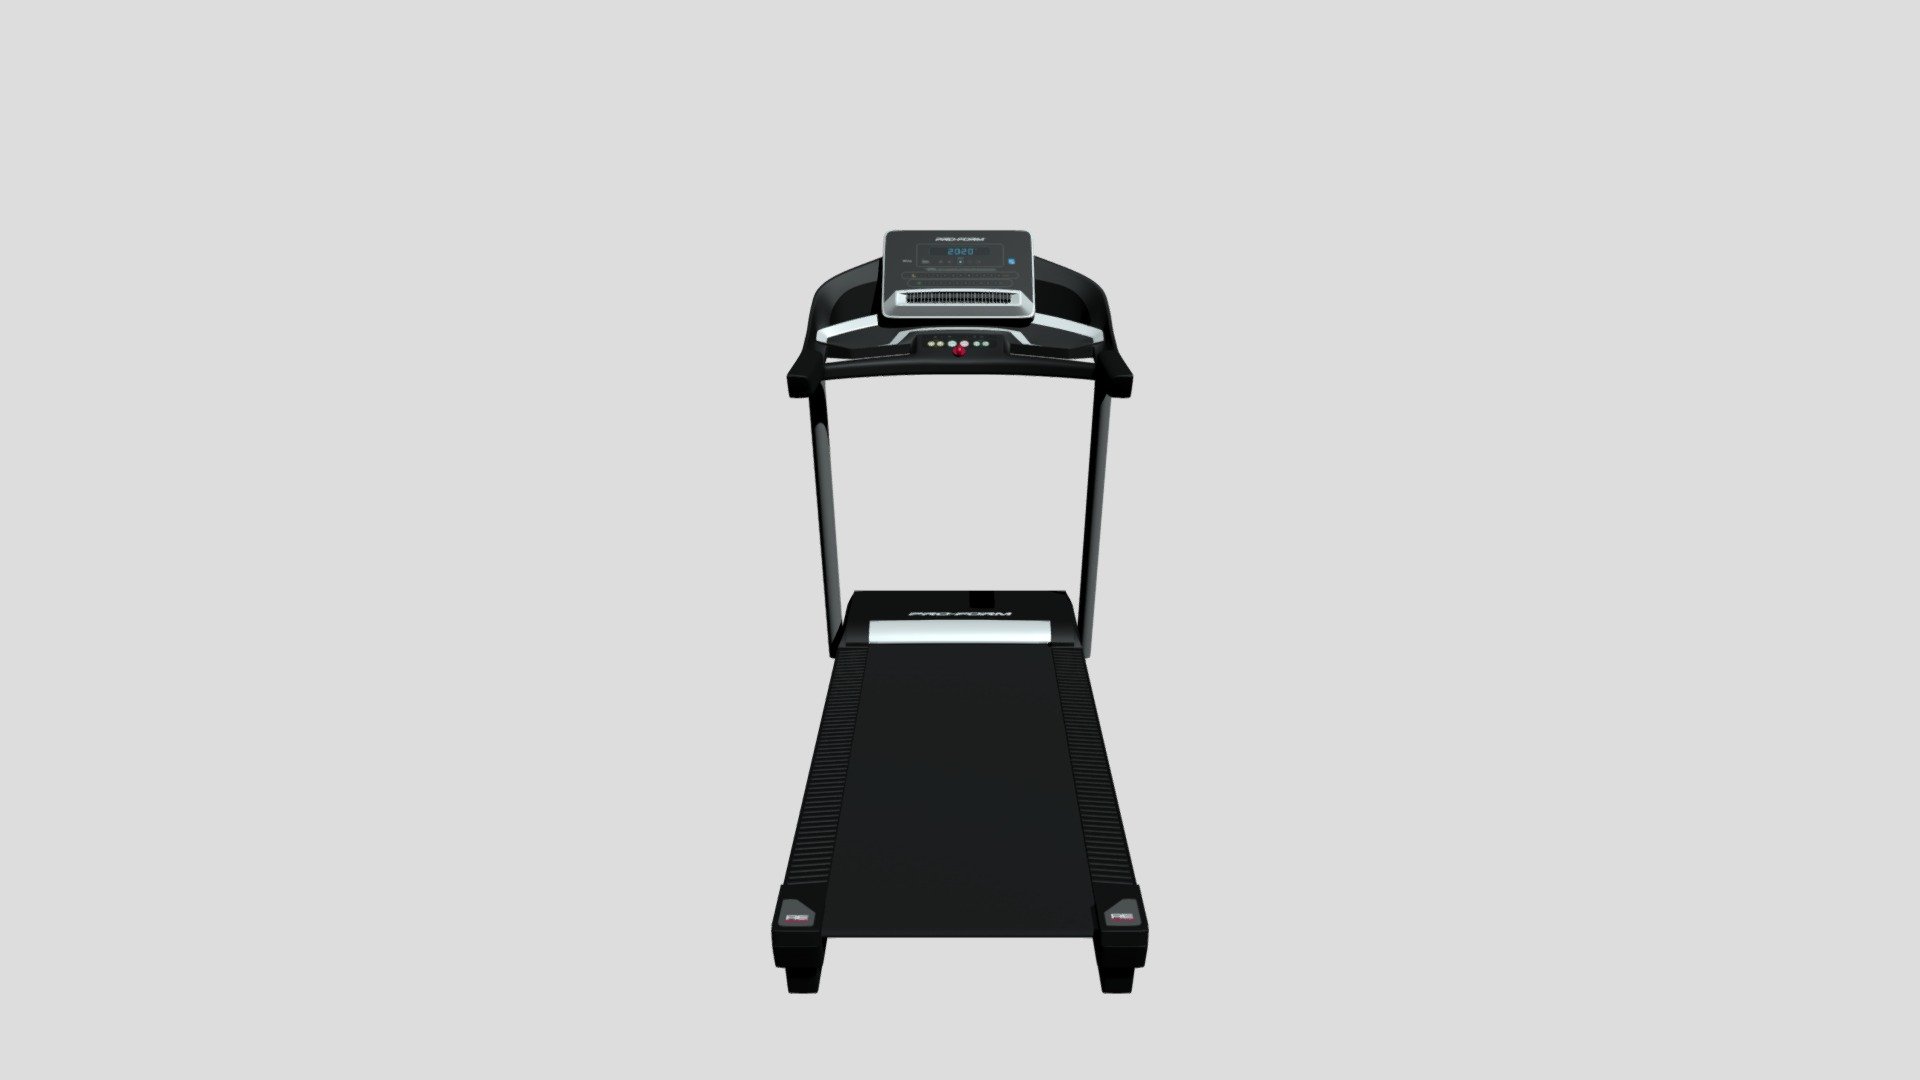 This is a treadmill gym instrument. 

Available formats: .glb .usdz &amp; .fbx with textures file.

Used Software : Blender &amp; Substance painter

Specification

VR / AR / High-poly : YES 
PBR : YES

Geometry Polygon mesh - 190k Vertices - 220k Textures - YES Materials - YES UV Mapping - YES Plugins used - NO

Thanks - Treadmill gym instrument - 3D model by chiragmoradiya 3d model